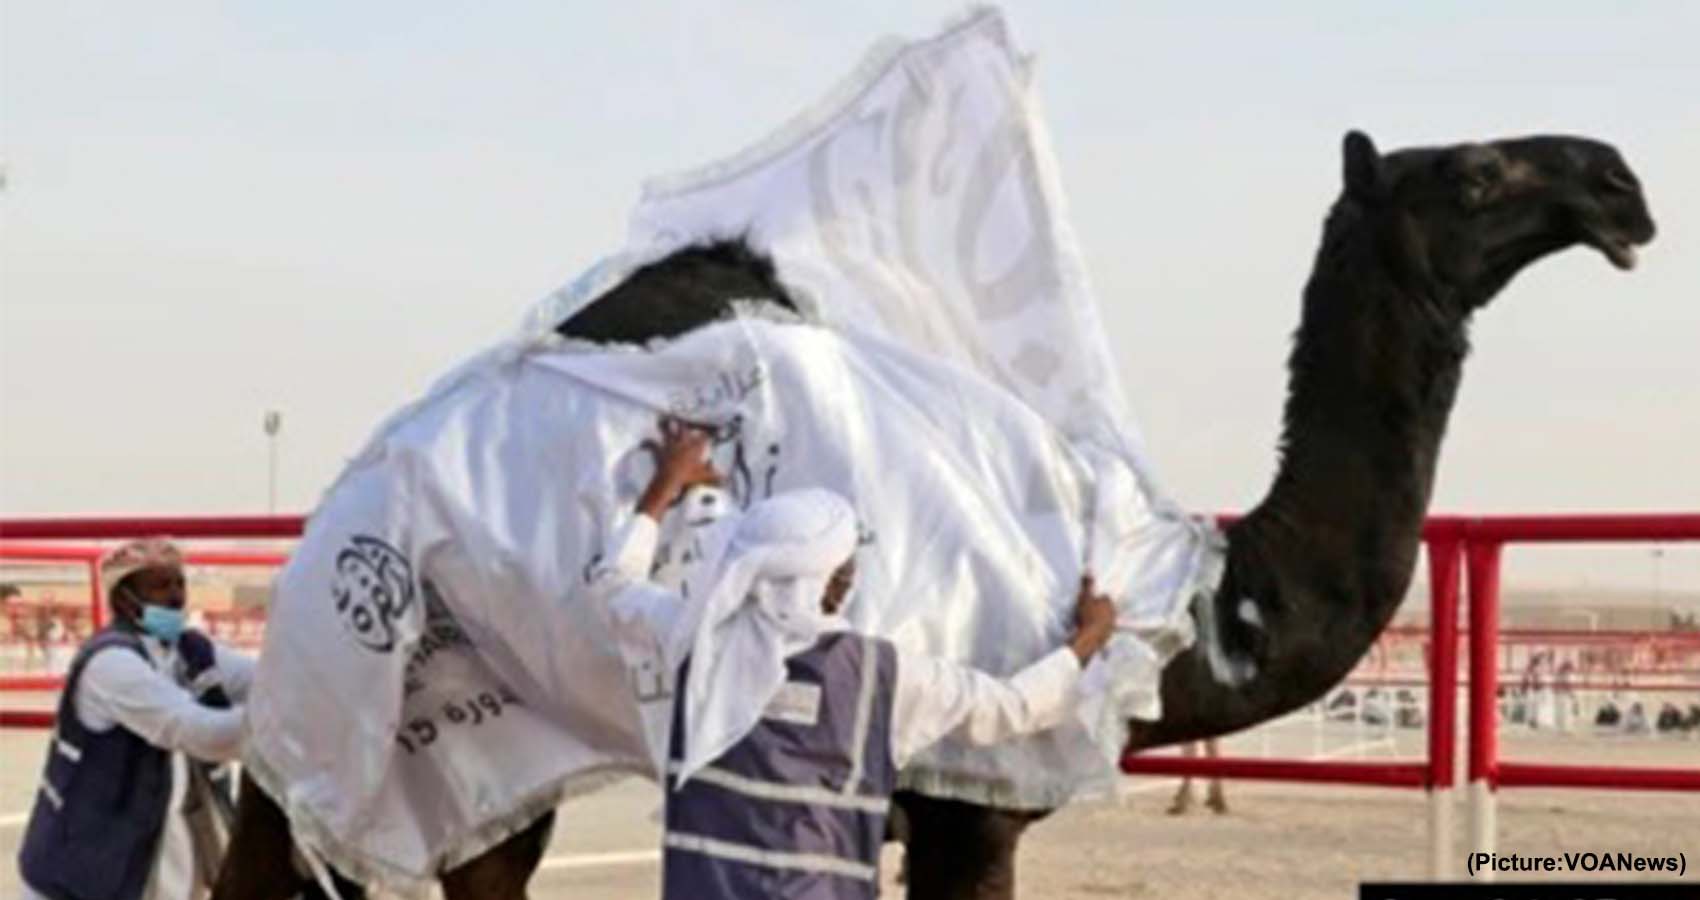 In UAE Desert, Camels Compete For Crowns In Beauty Pageant